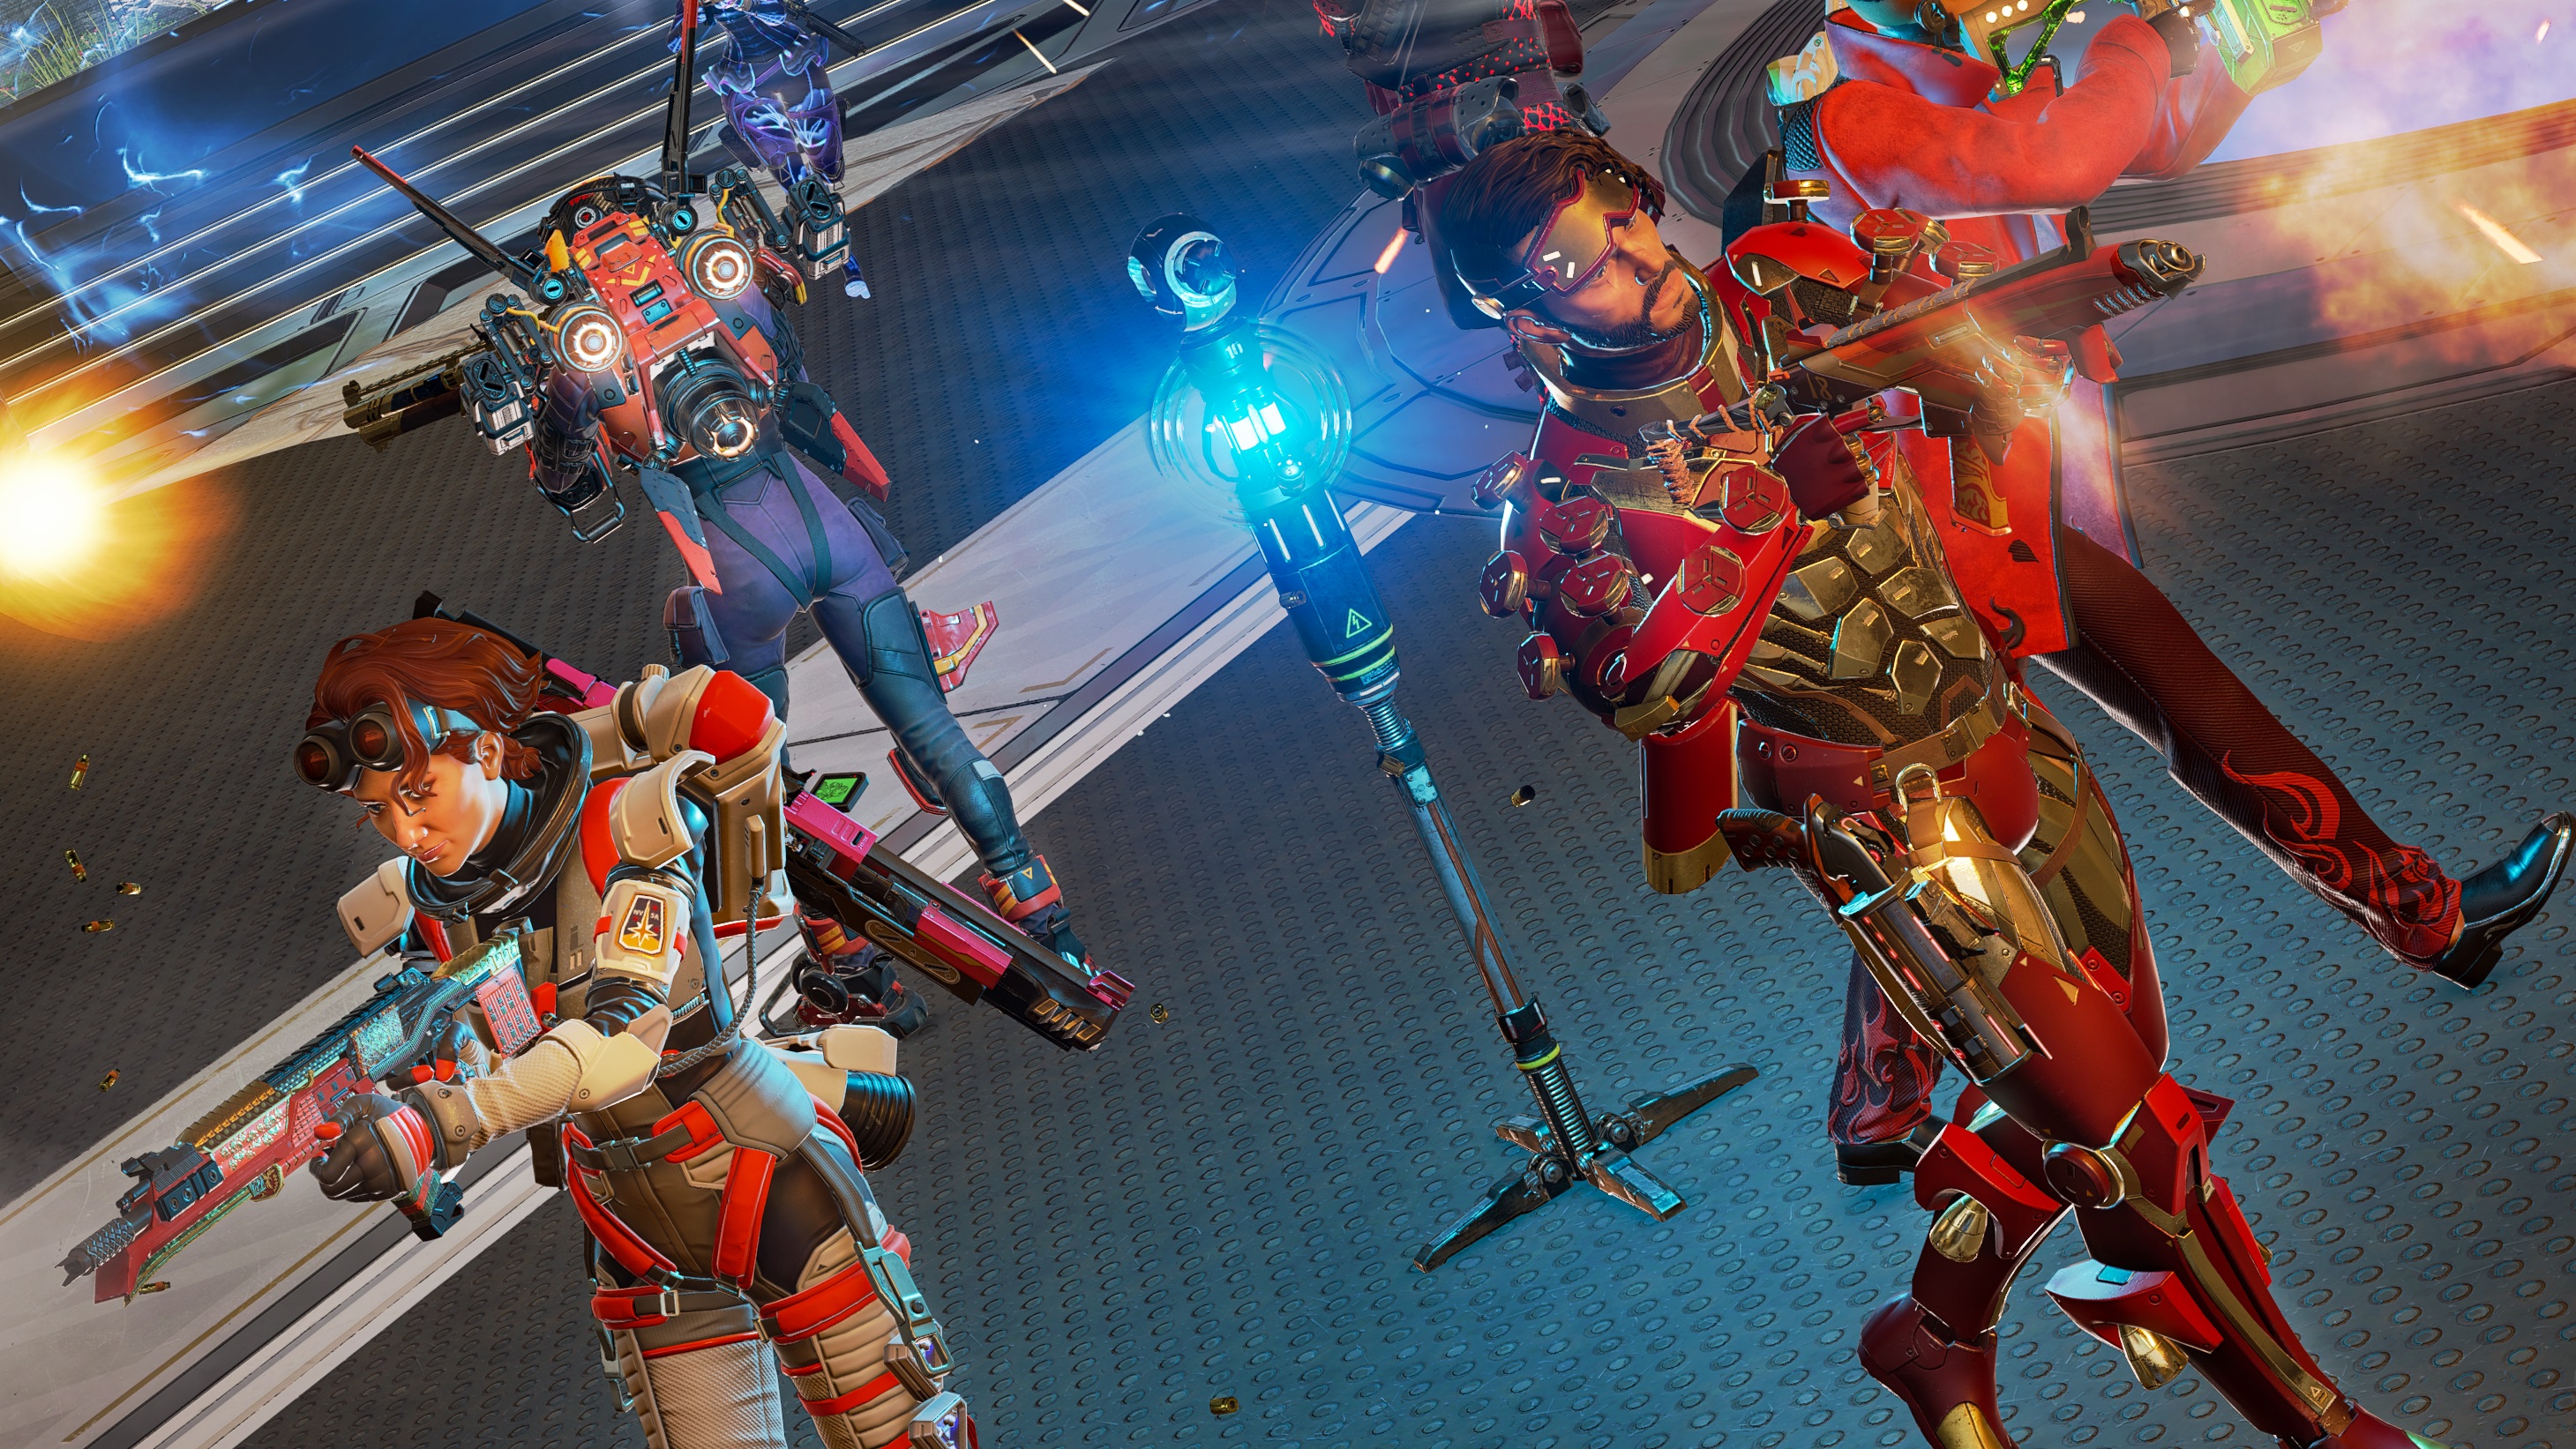  Control is the chill, low-stakes shootout Apex Legends needs 